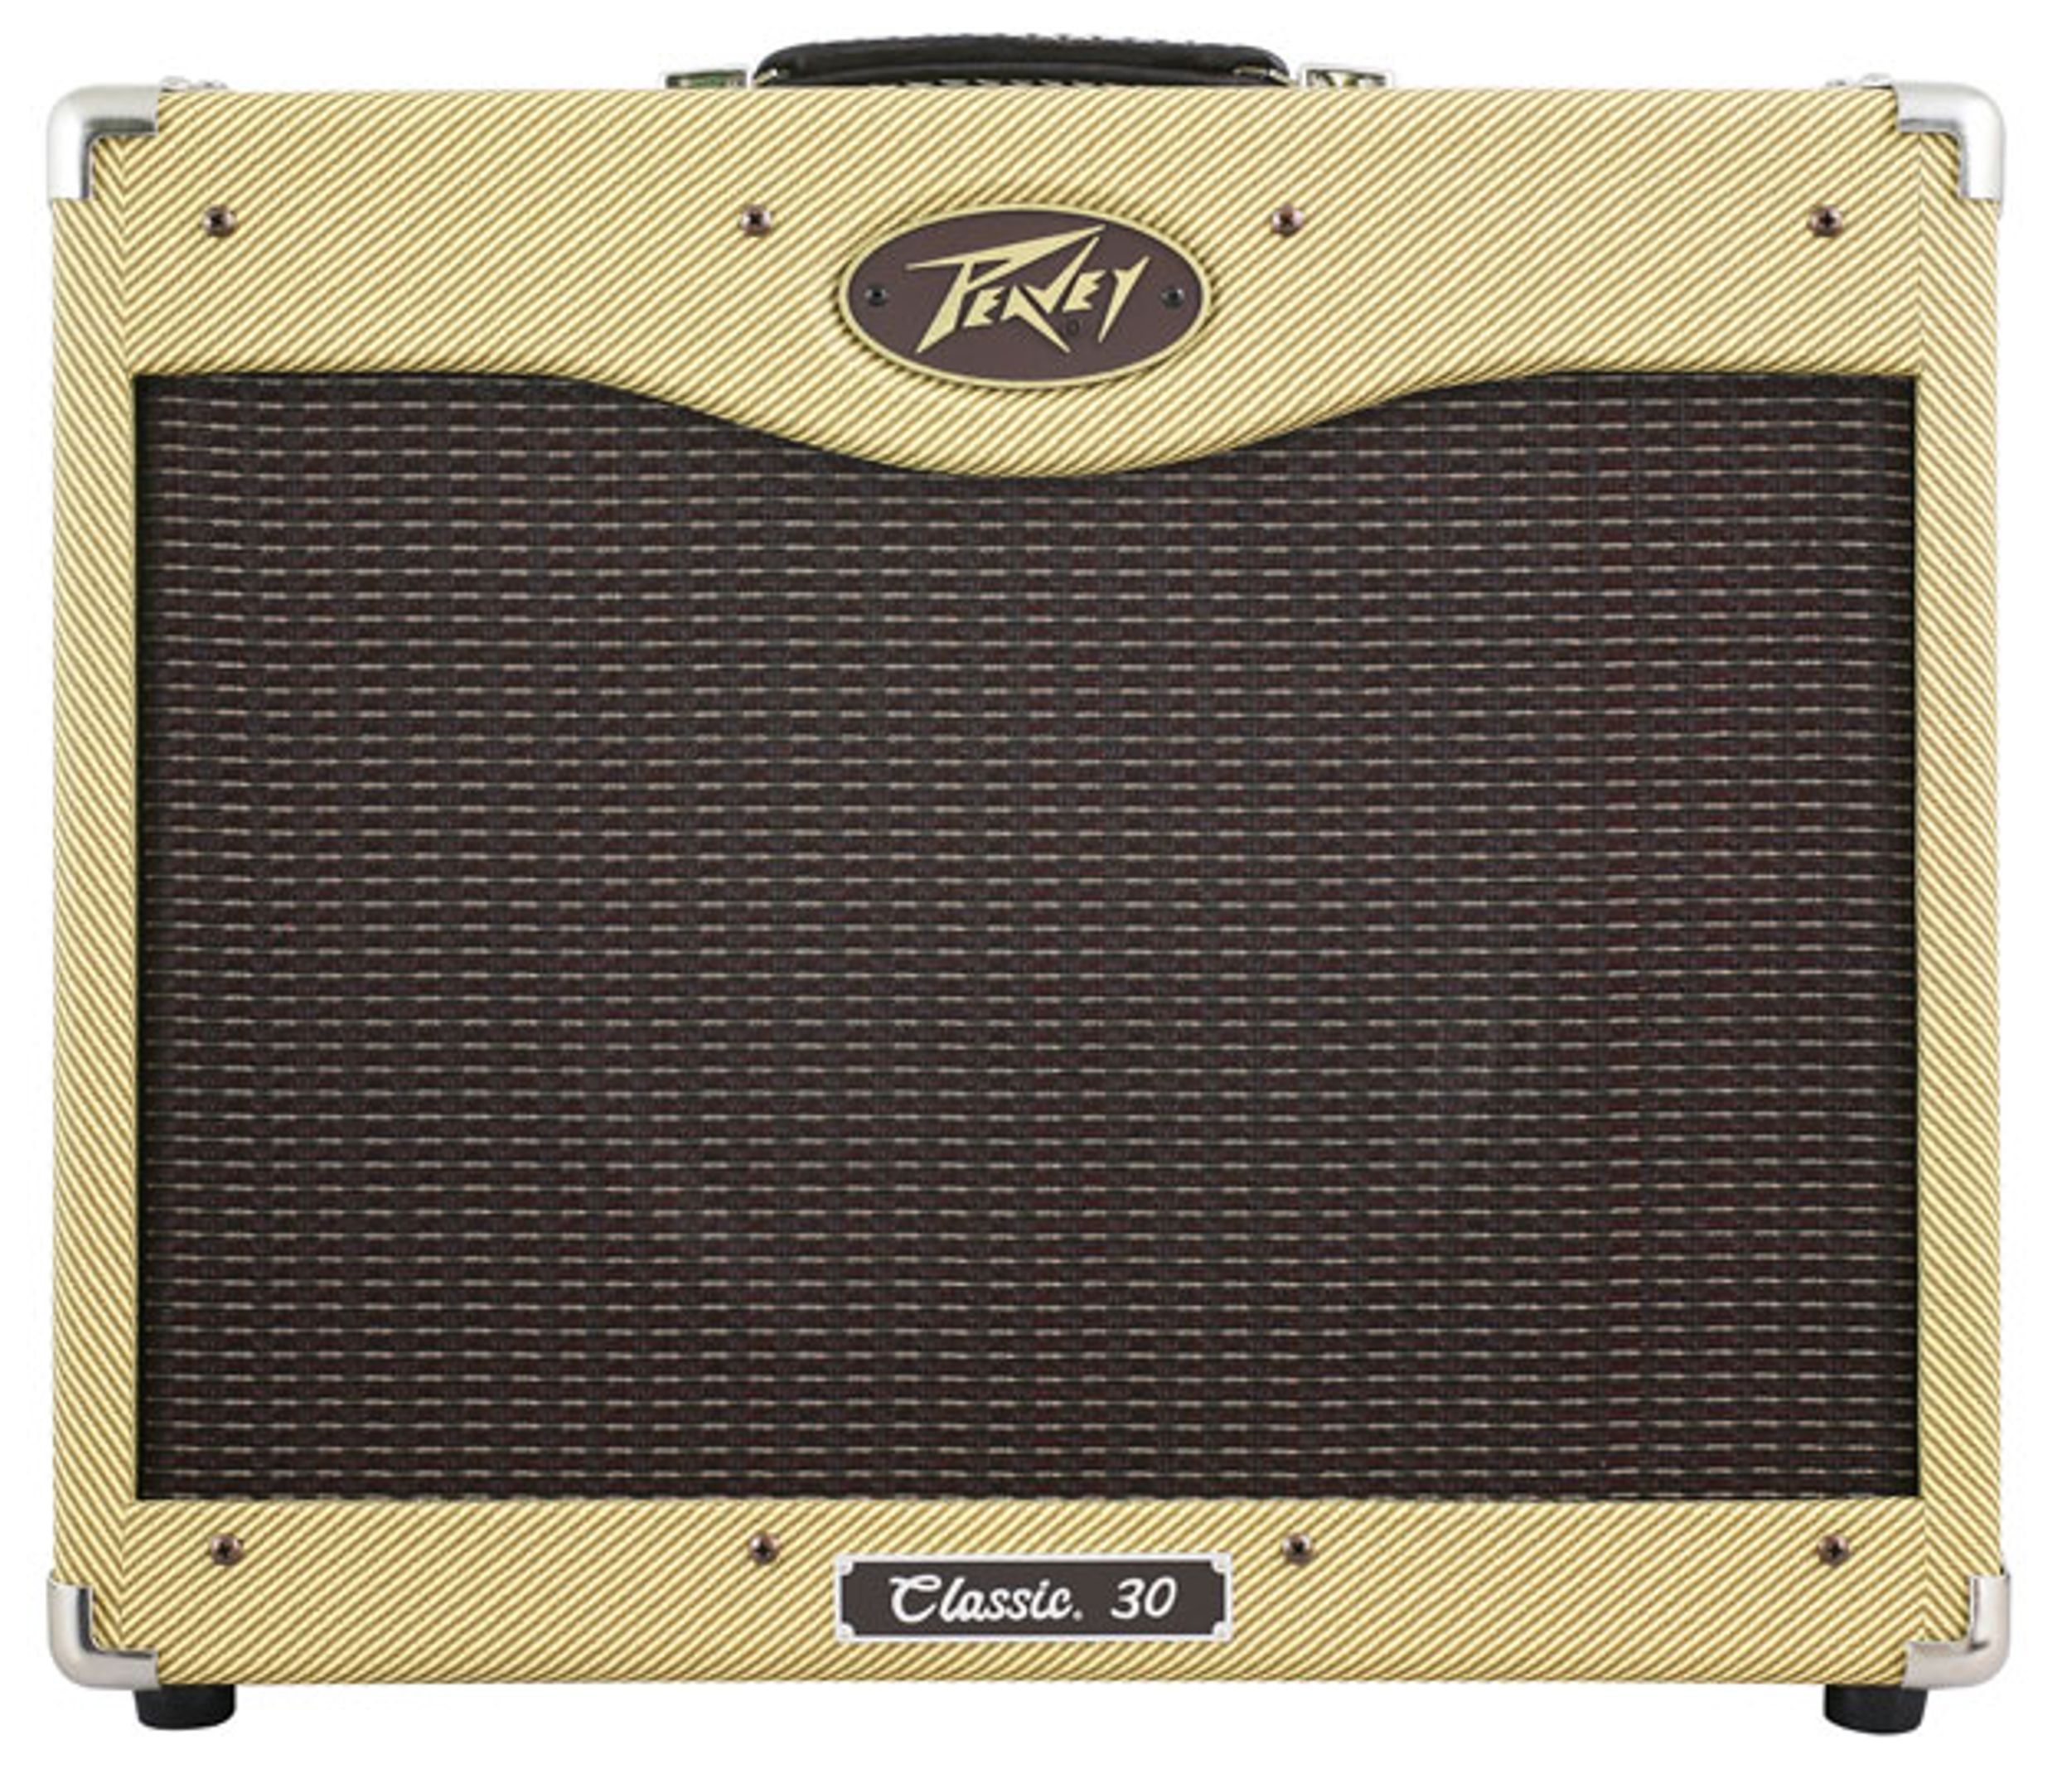 Peavey Redesigns Classic Series Amplifiers